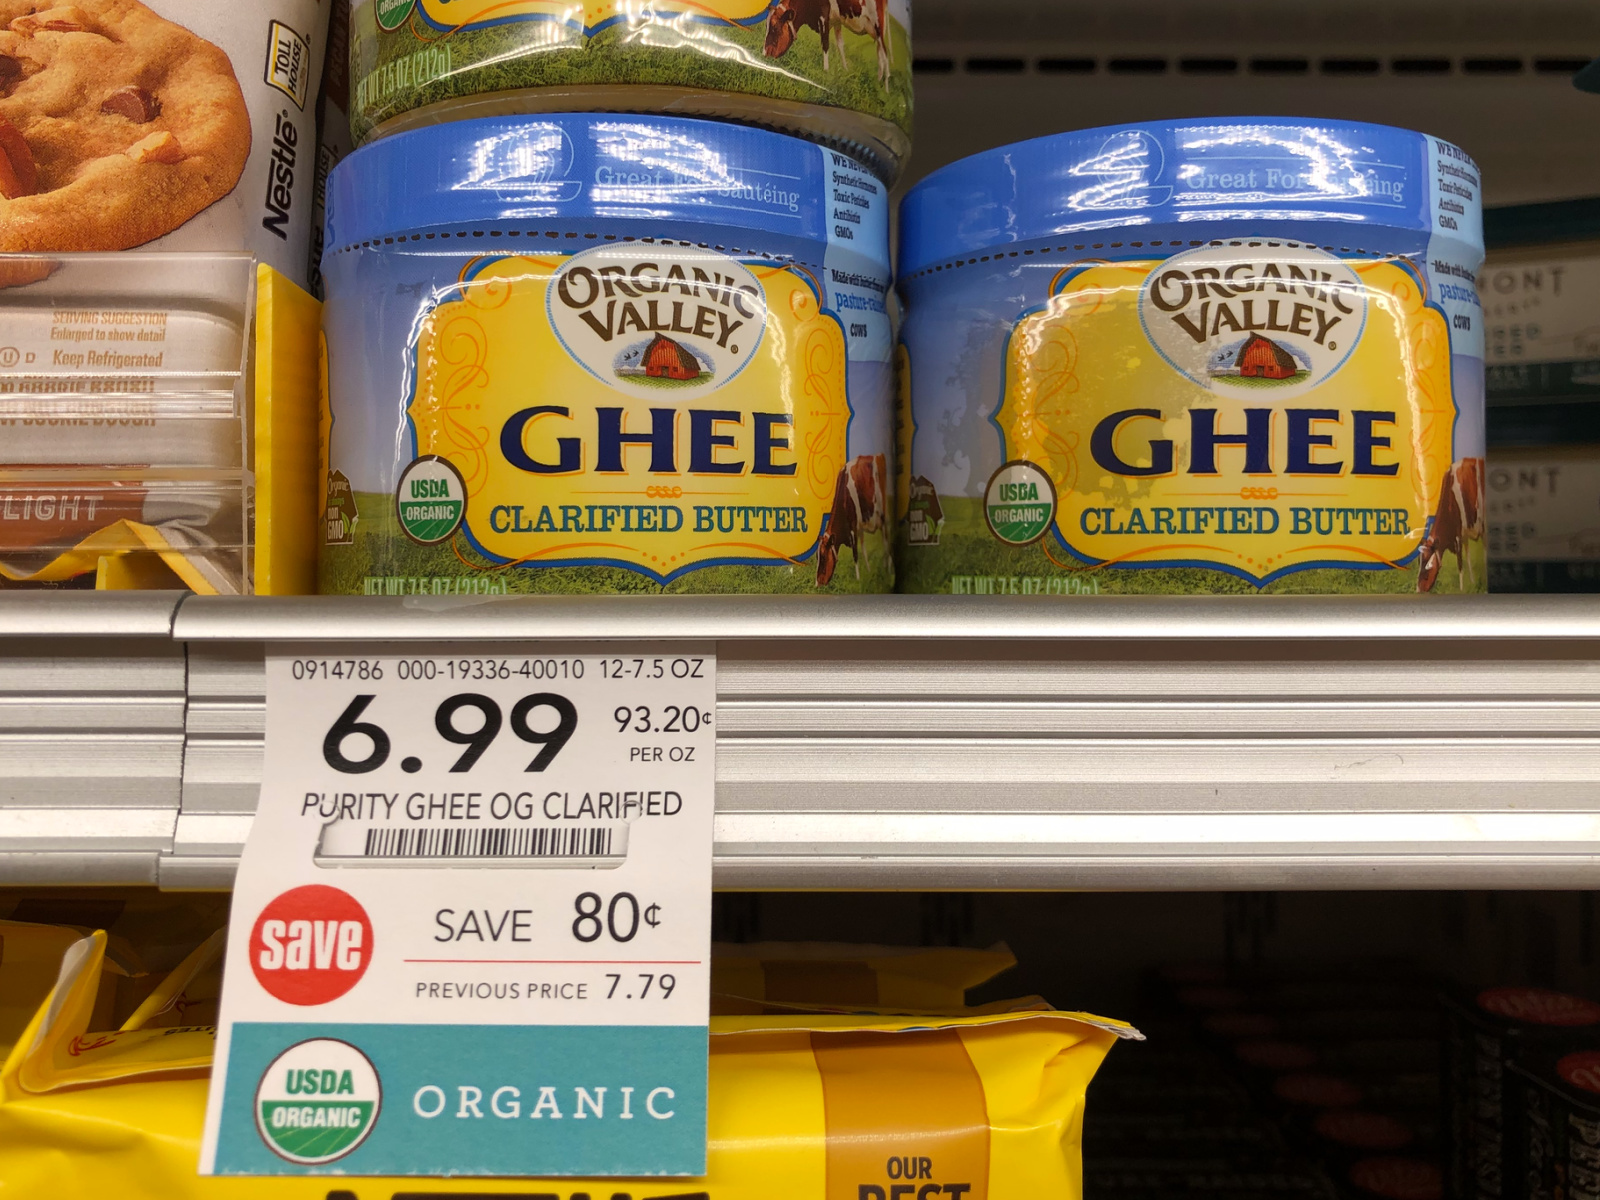 Your Must-Have Recipe For The Holidays - Ghee Fudge! (Grab Huge Savings On Organic Valley Ghee At Publix) on I Heart Publix